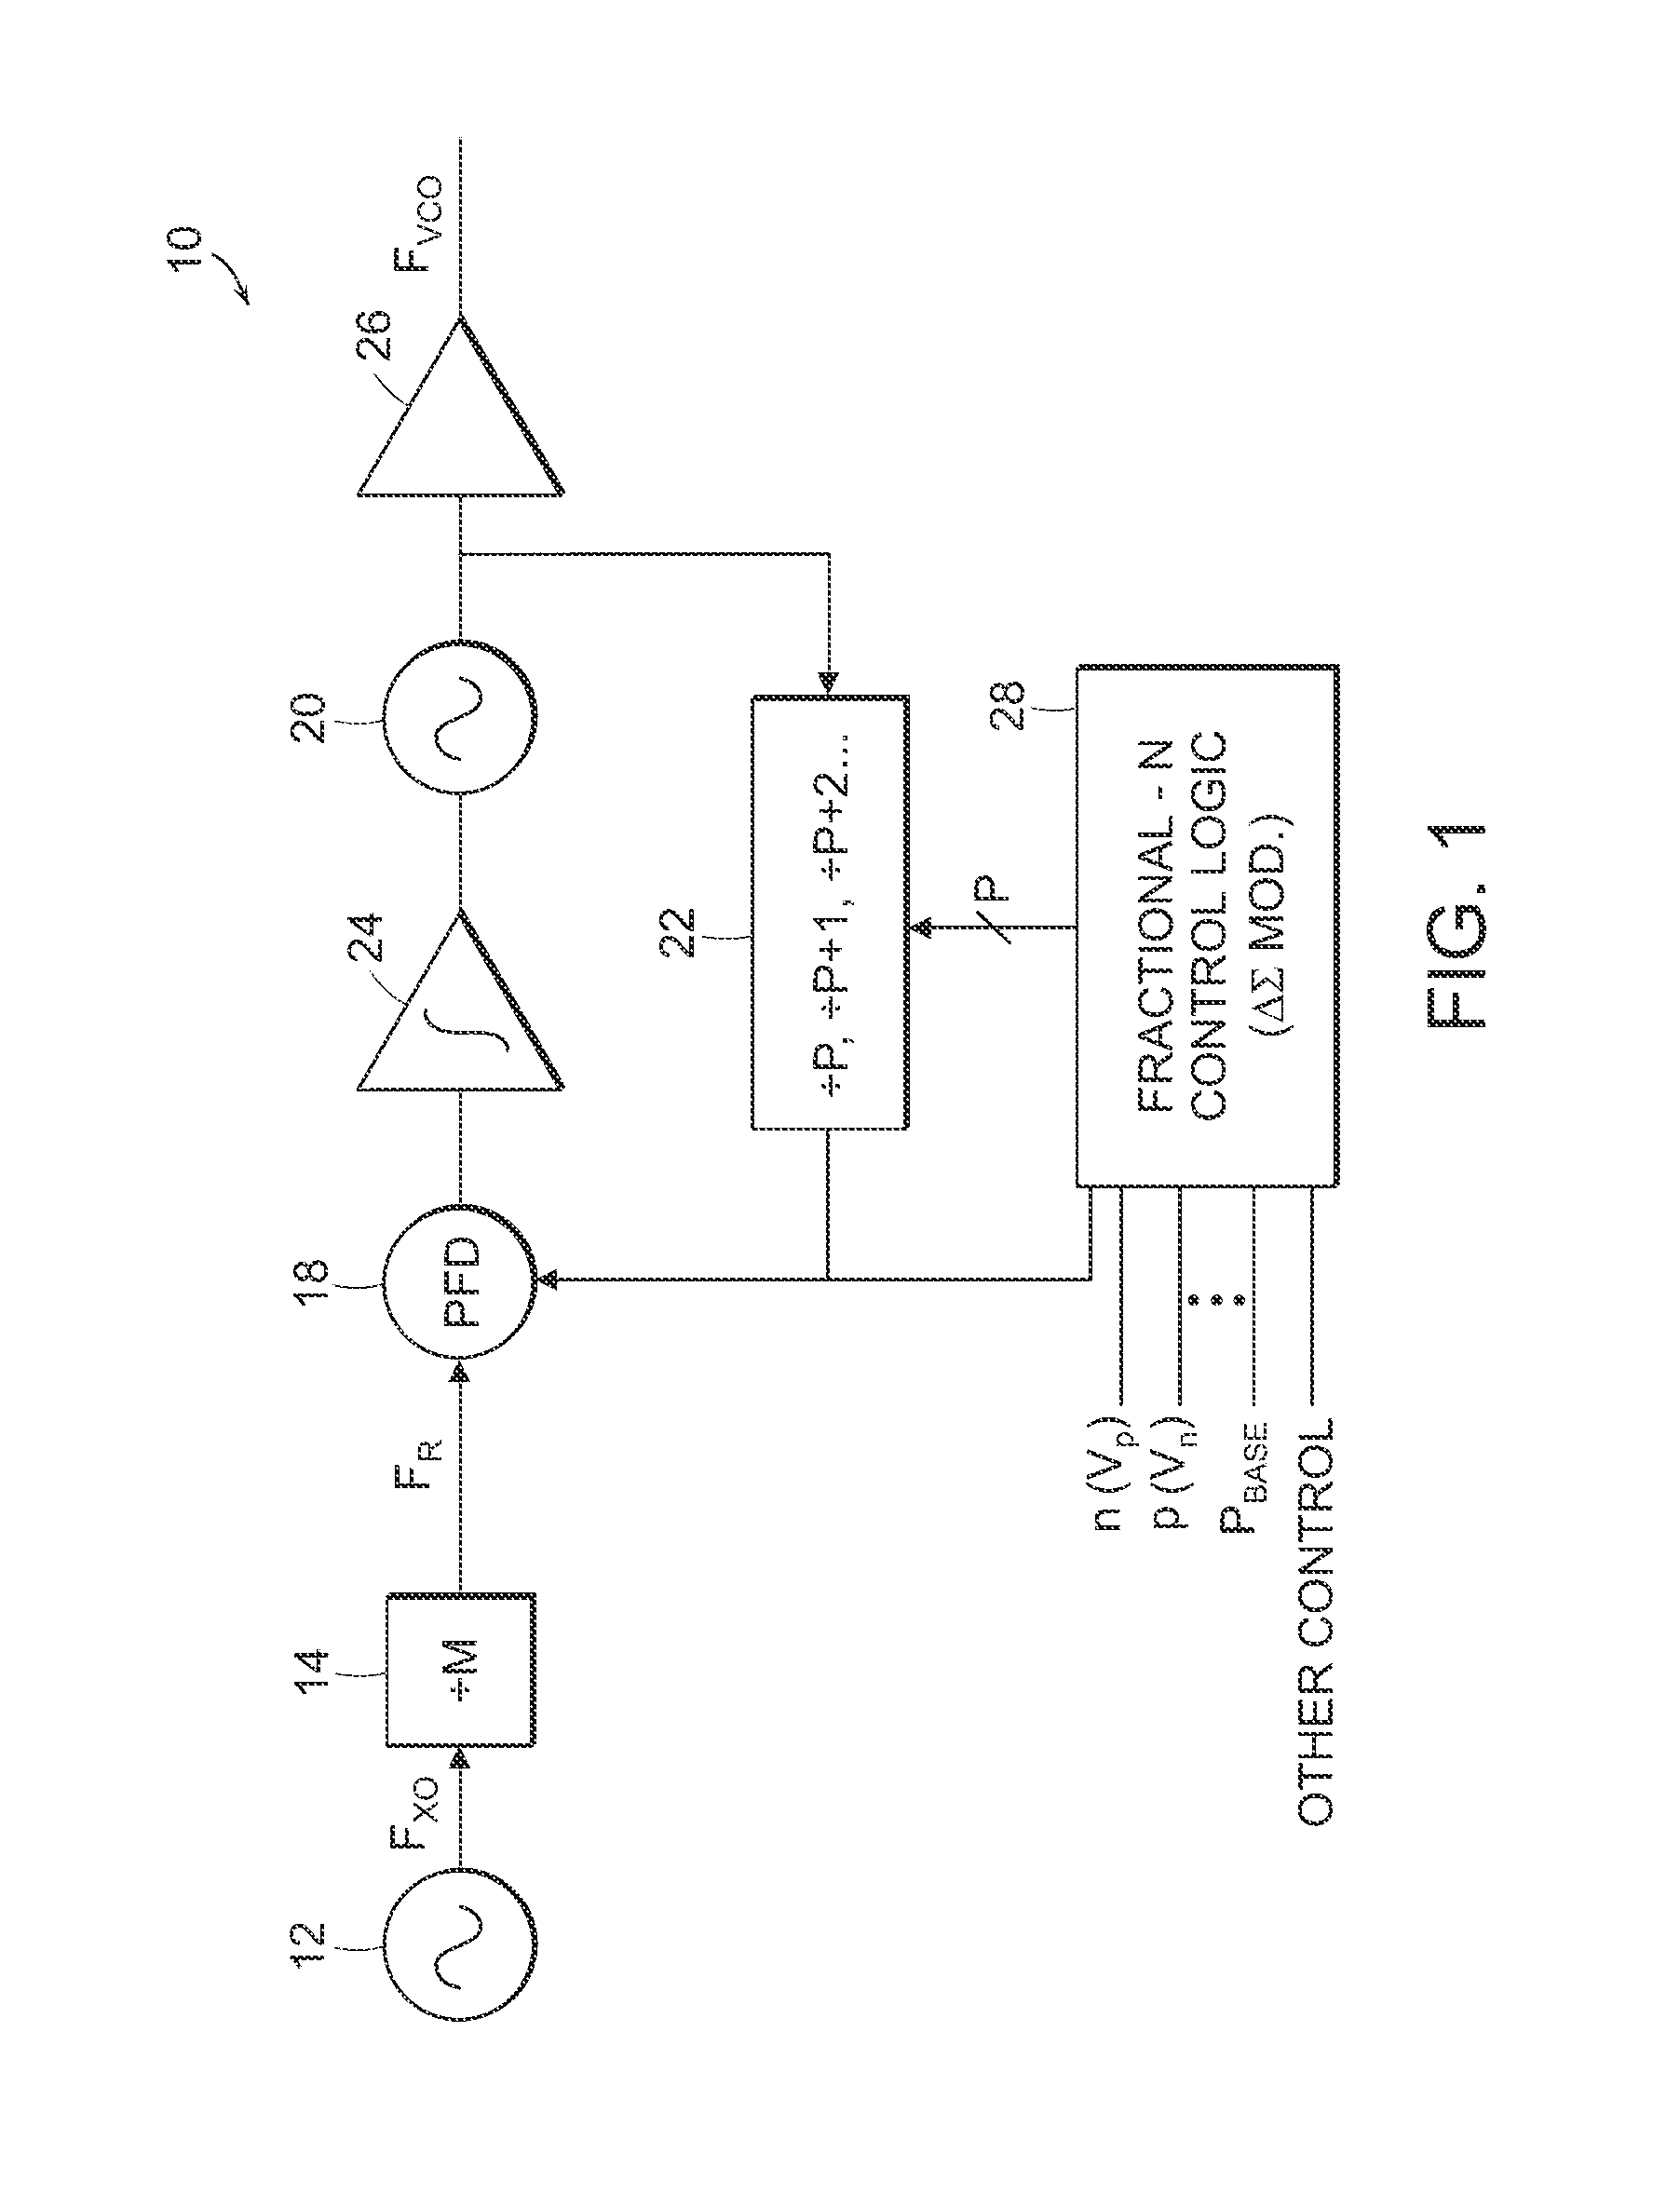 Frequency modulator, circuit, and method that uses multiple vector accumulation to achieve fractional-N frequency synthesis